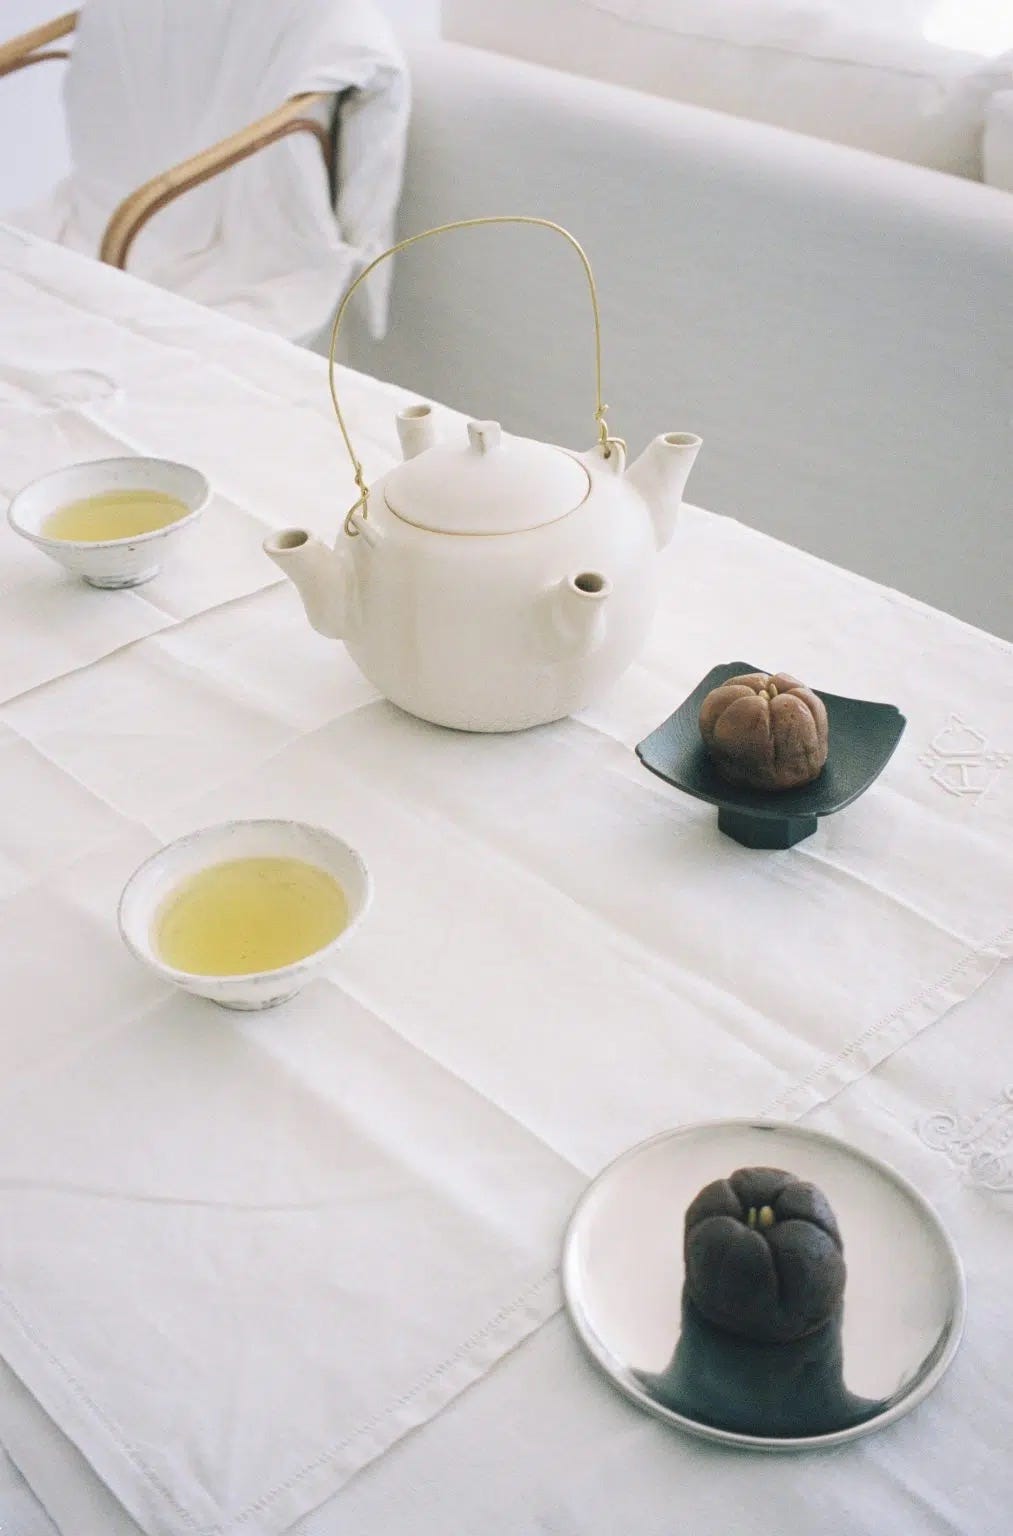 Dora Daar I to We teapot on a linen-covered dining table